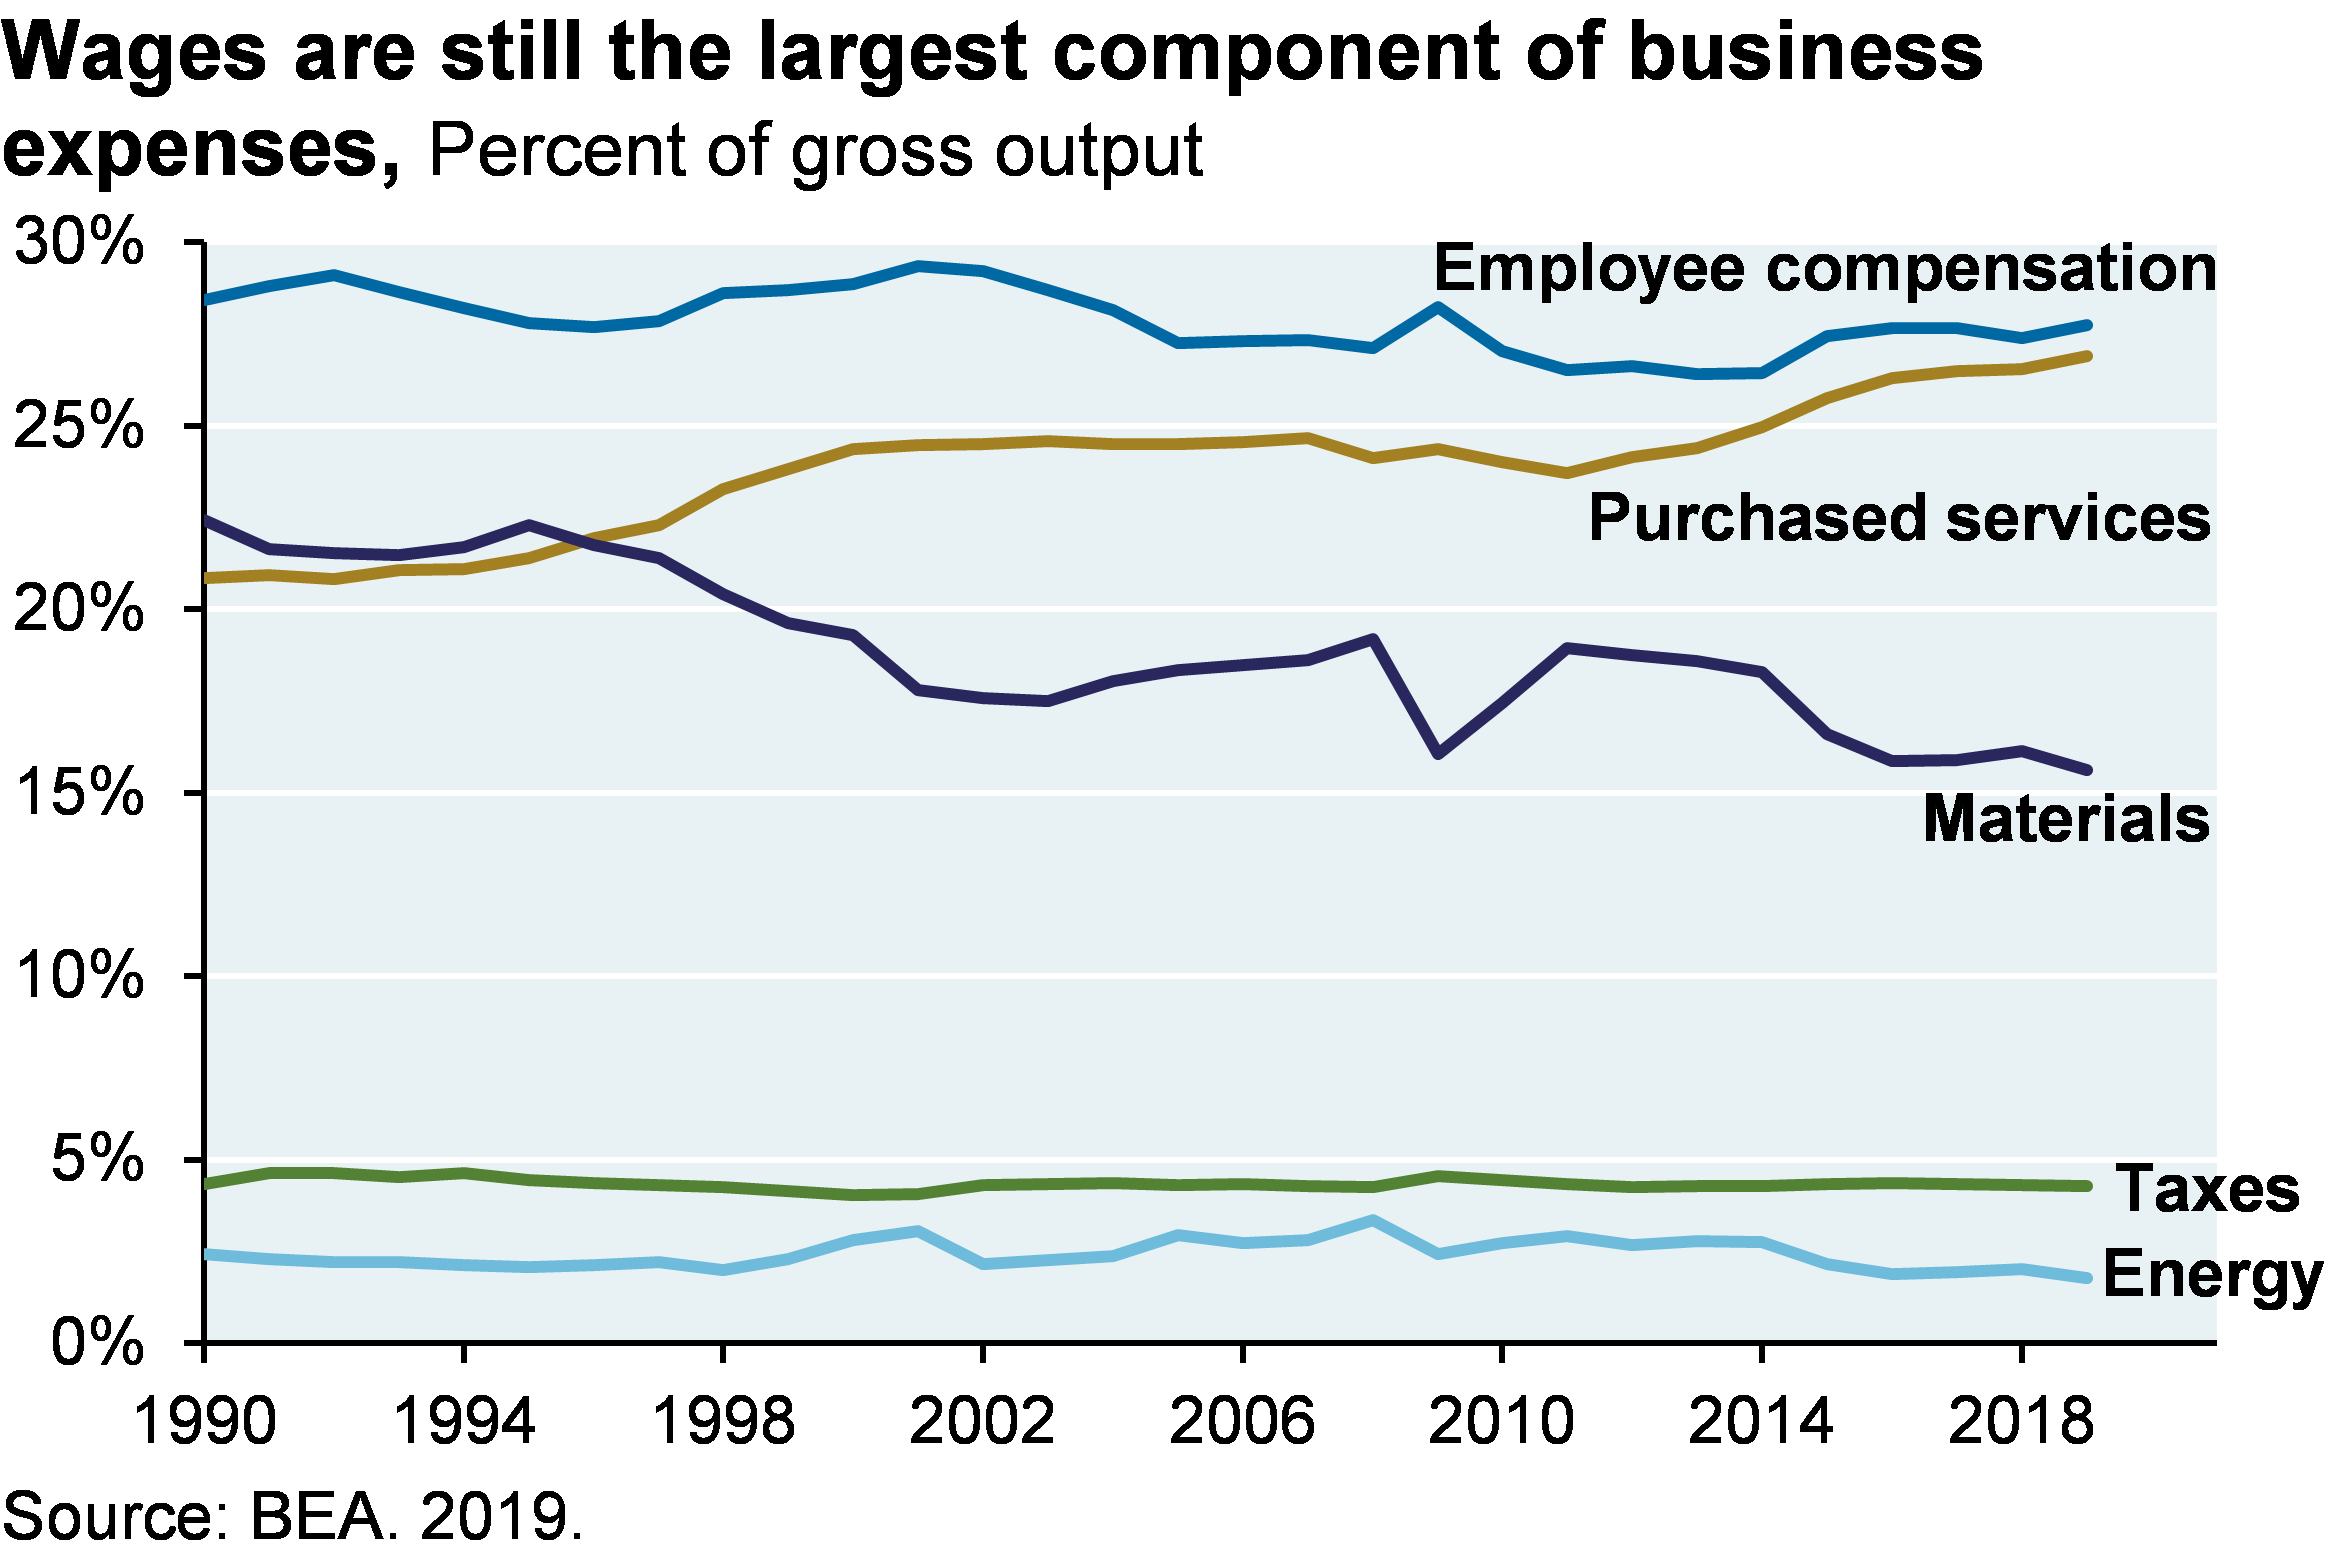 Line chart which shows various business expenses as percent of gross output. The chart includes employee compensation, purchased services, materials, taxes and energy. Wages have been the largest component of business expenses since 1990 and are currently 27% of gross output.